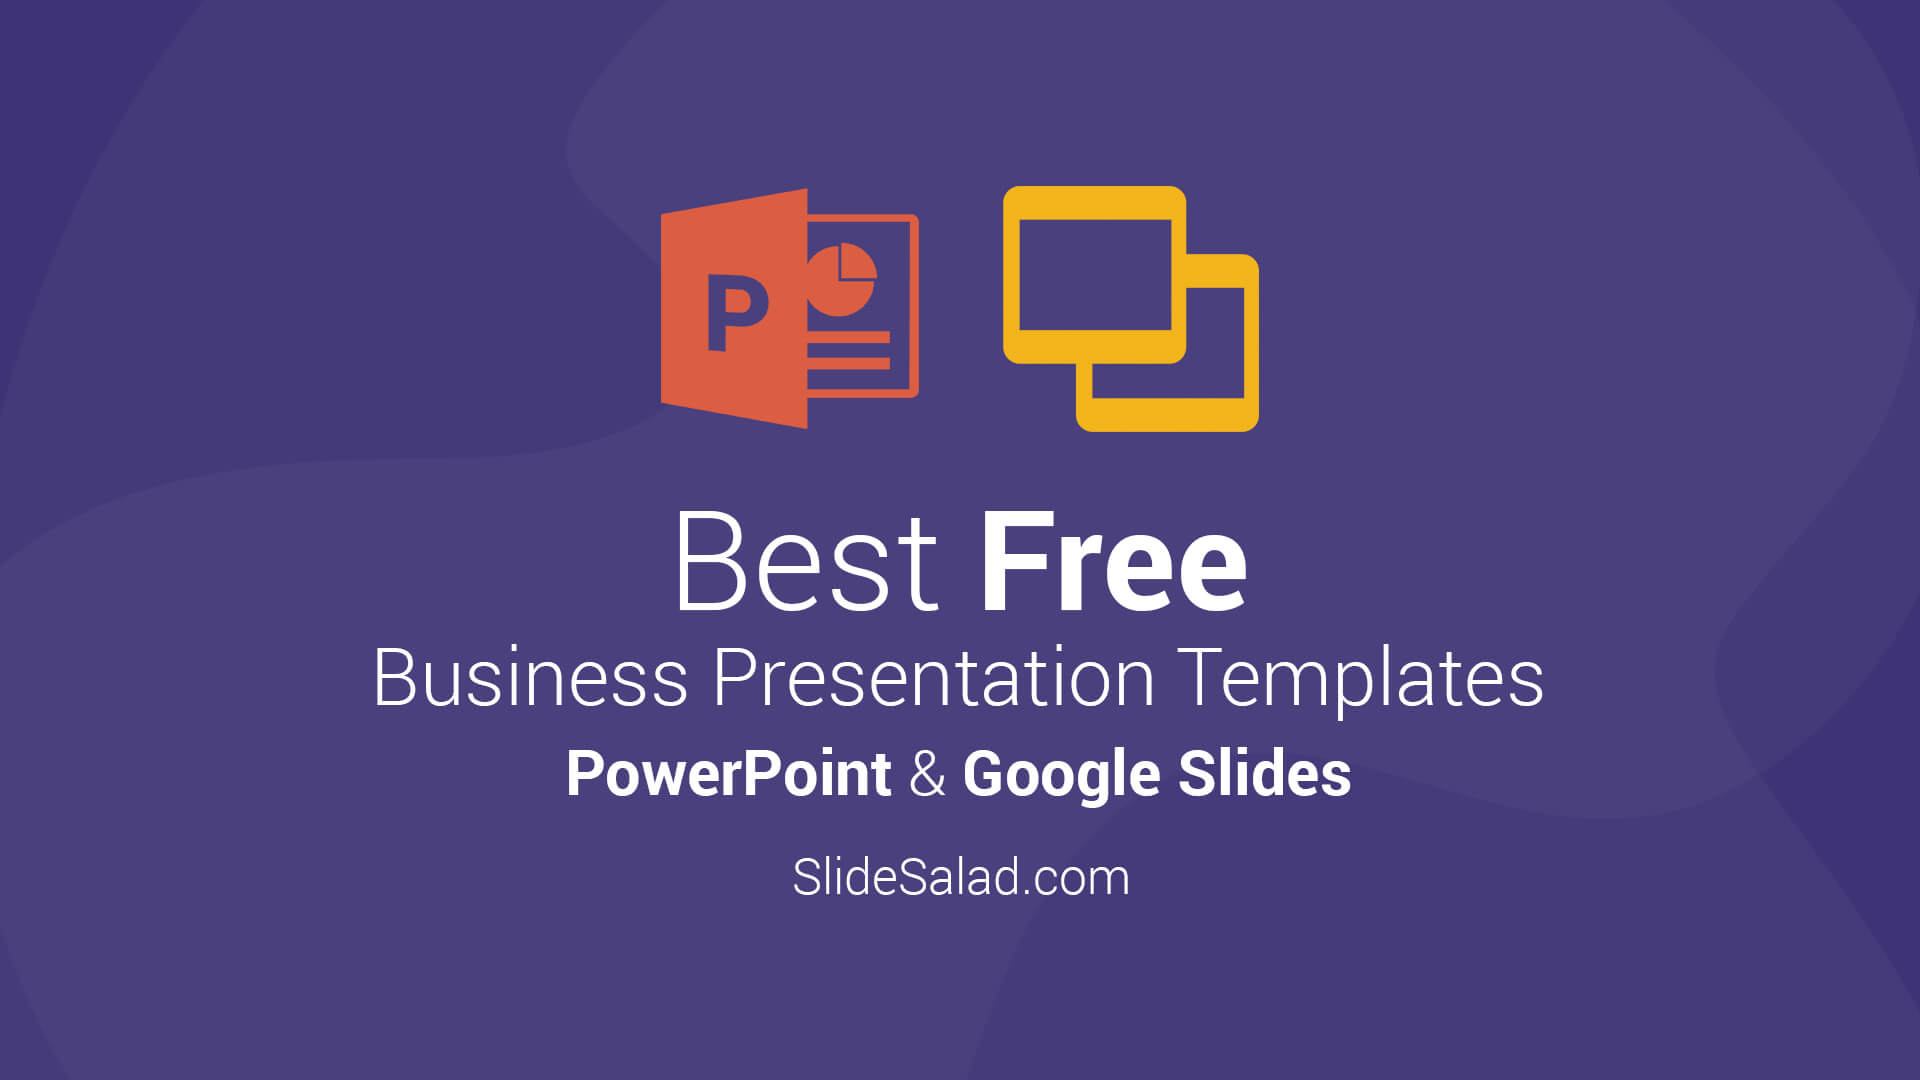 Best Free Presentation Templates Professional Designs 2020 Pertaining To Best Business Presentation Templates Free Download